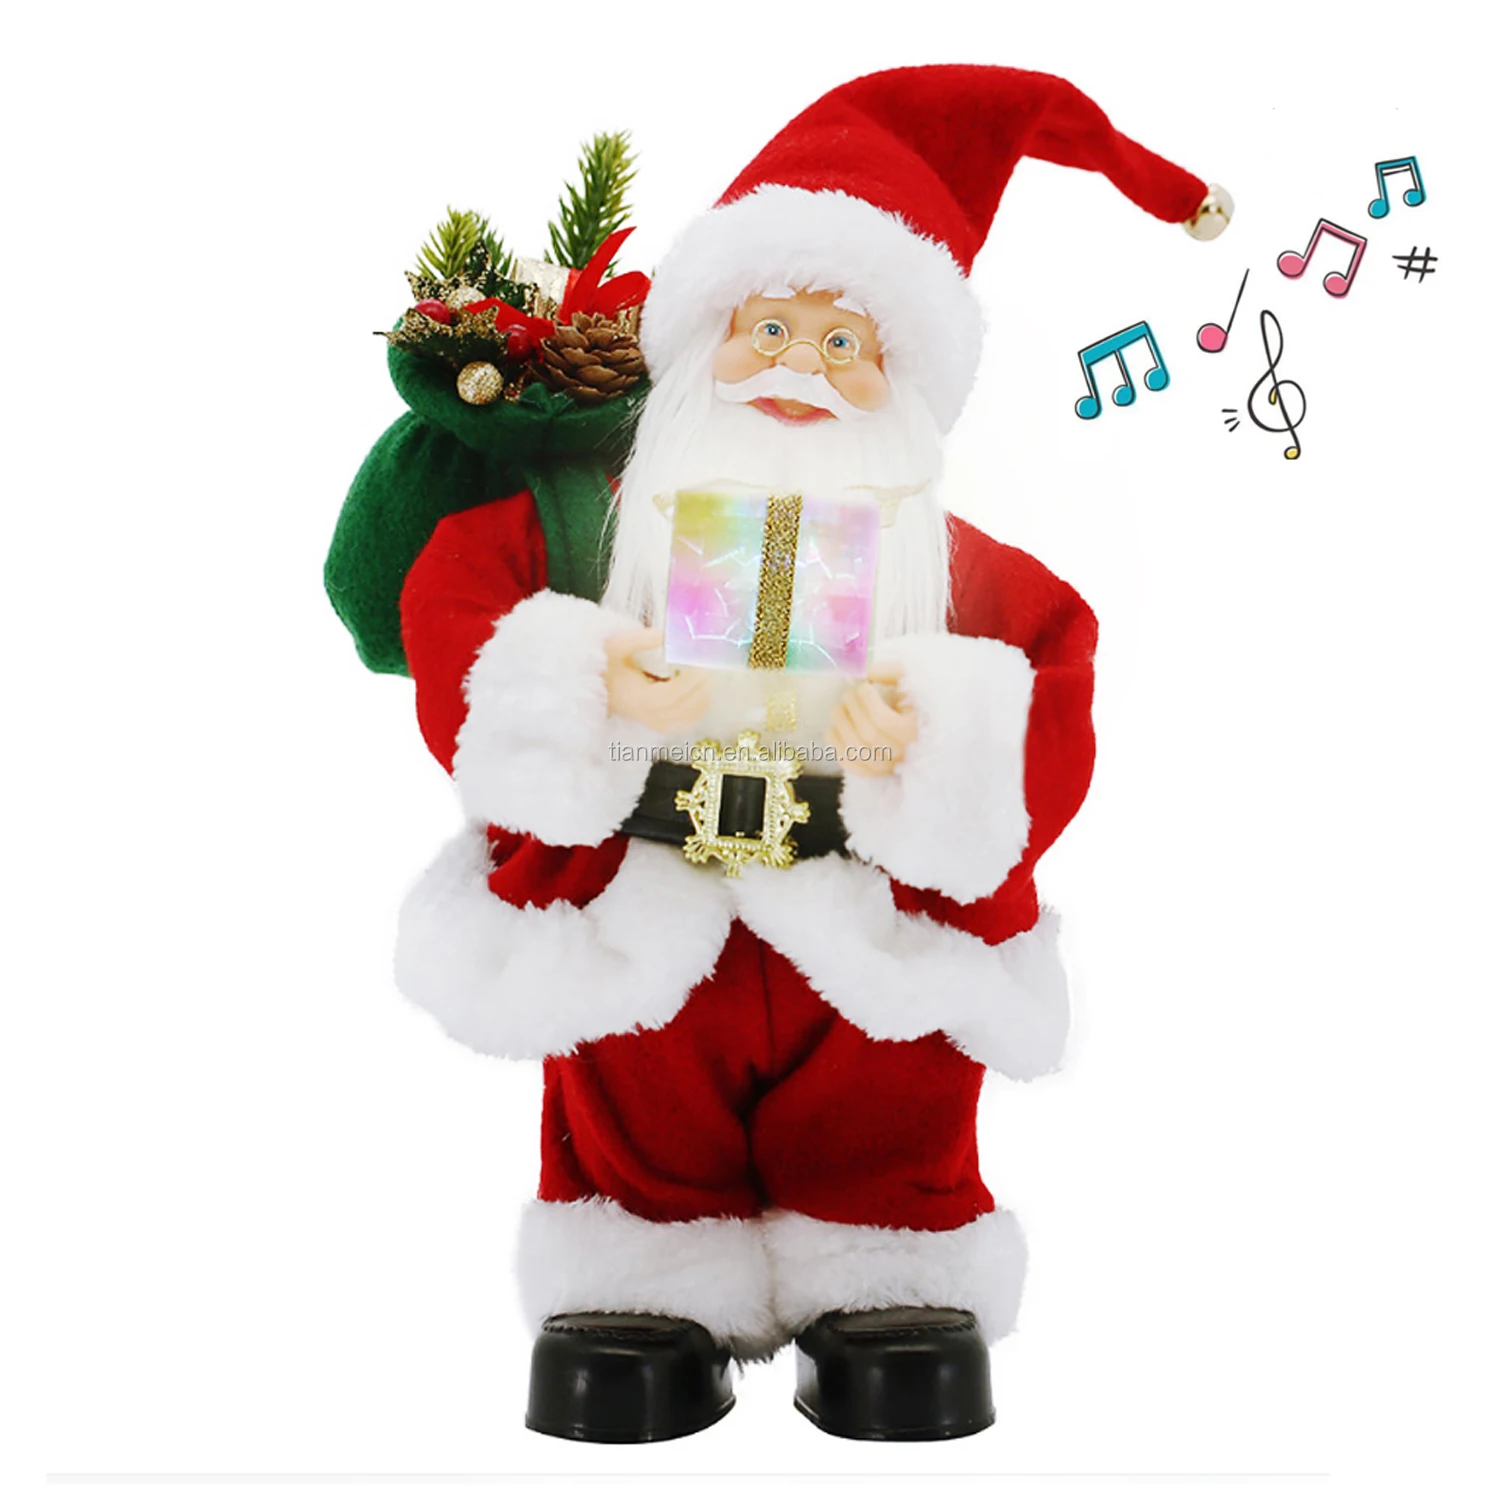 12Inch Christmas Santa Claus with Music Animated Standing Led Lighting Singing and Dancing Red Life size Clausing Figurie